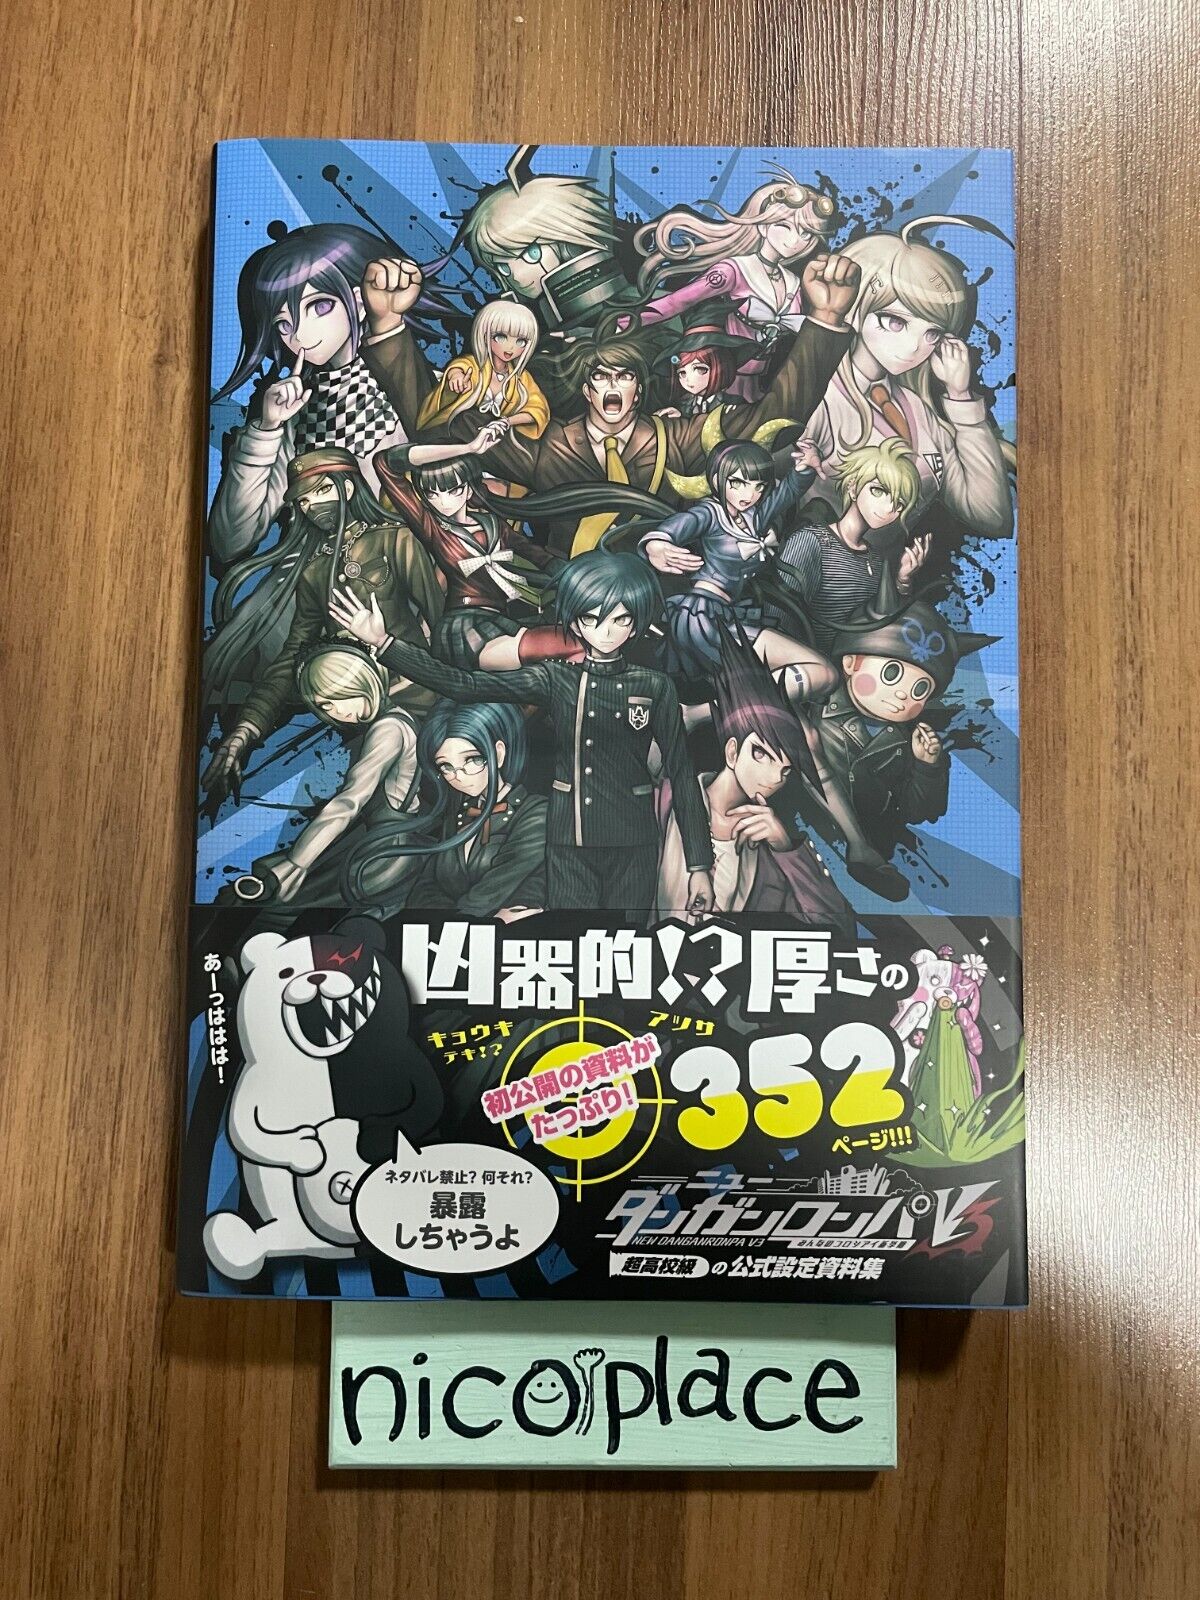 Danganronpa 3 V3 Killing Harmony Official Art Works Book 352 Color Pages